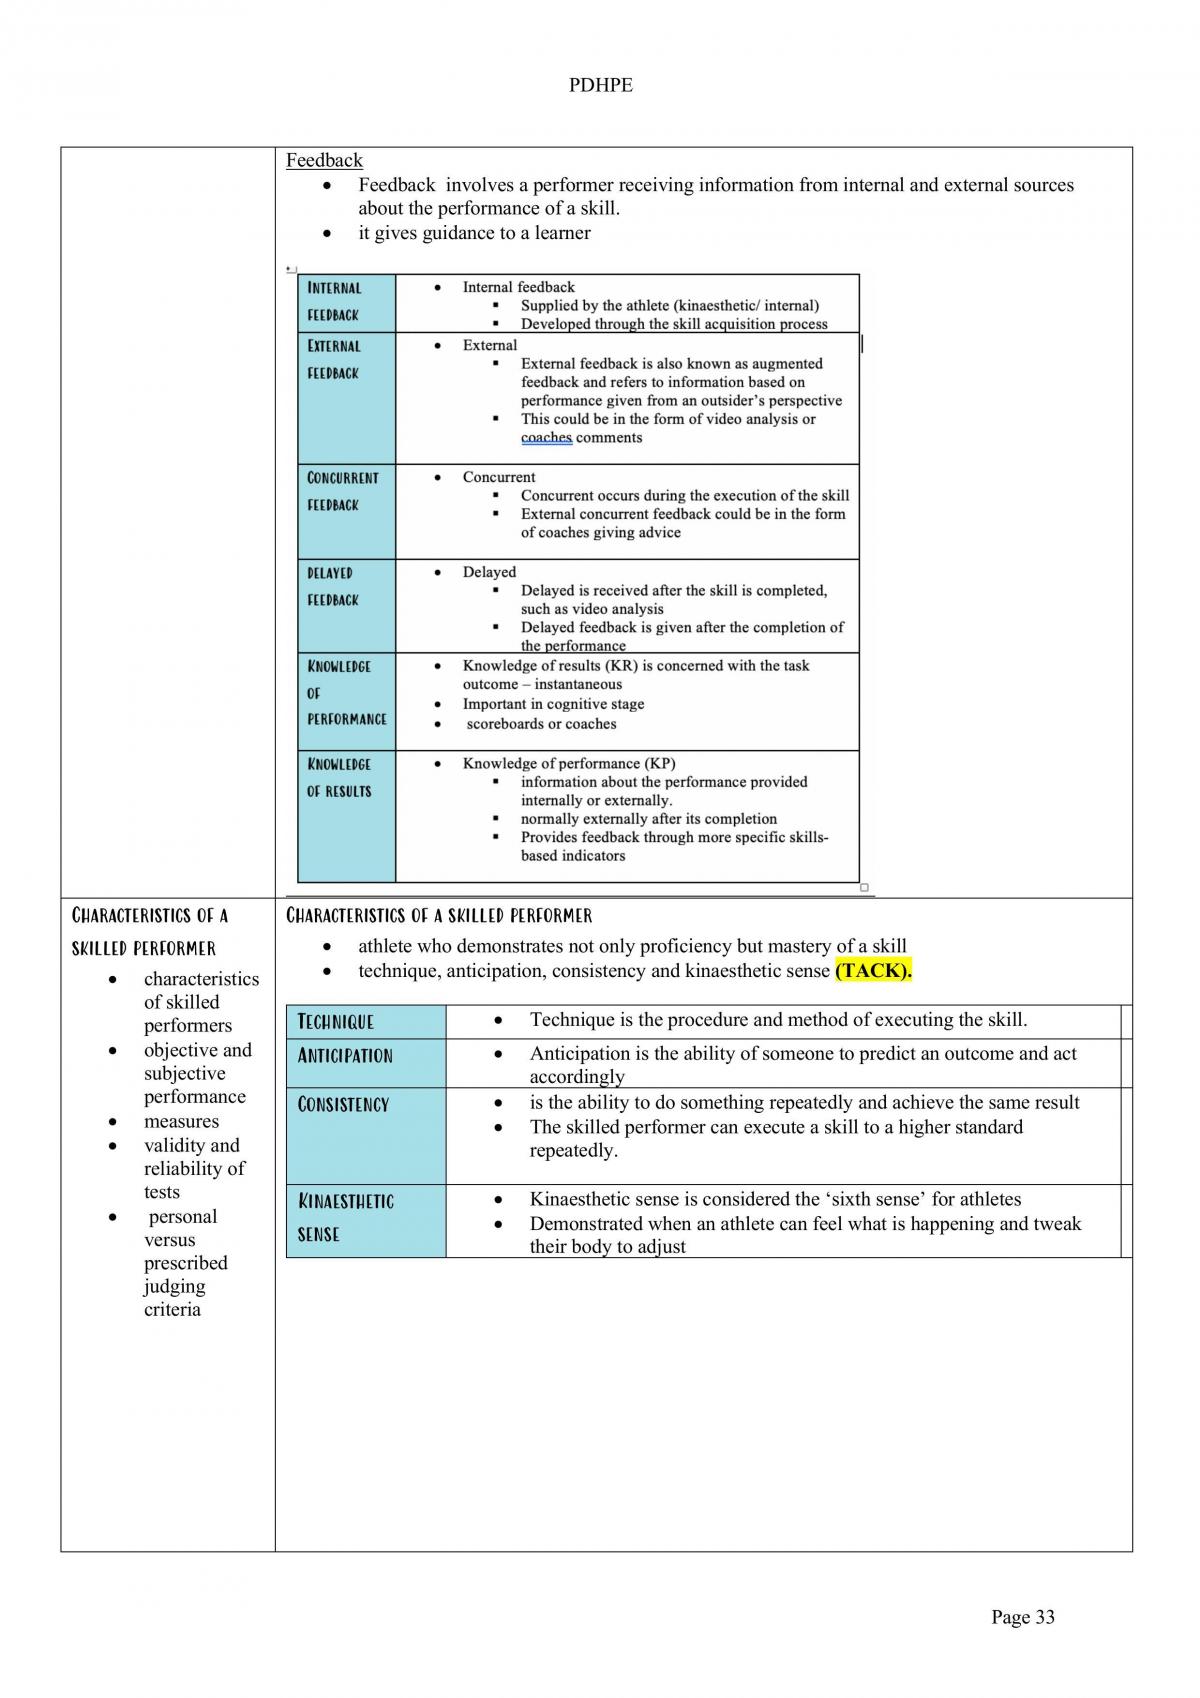 PDHPE Concise Syllabus Notes - Page 33